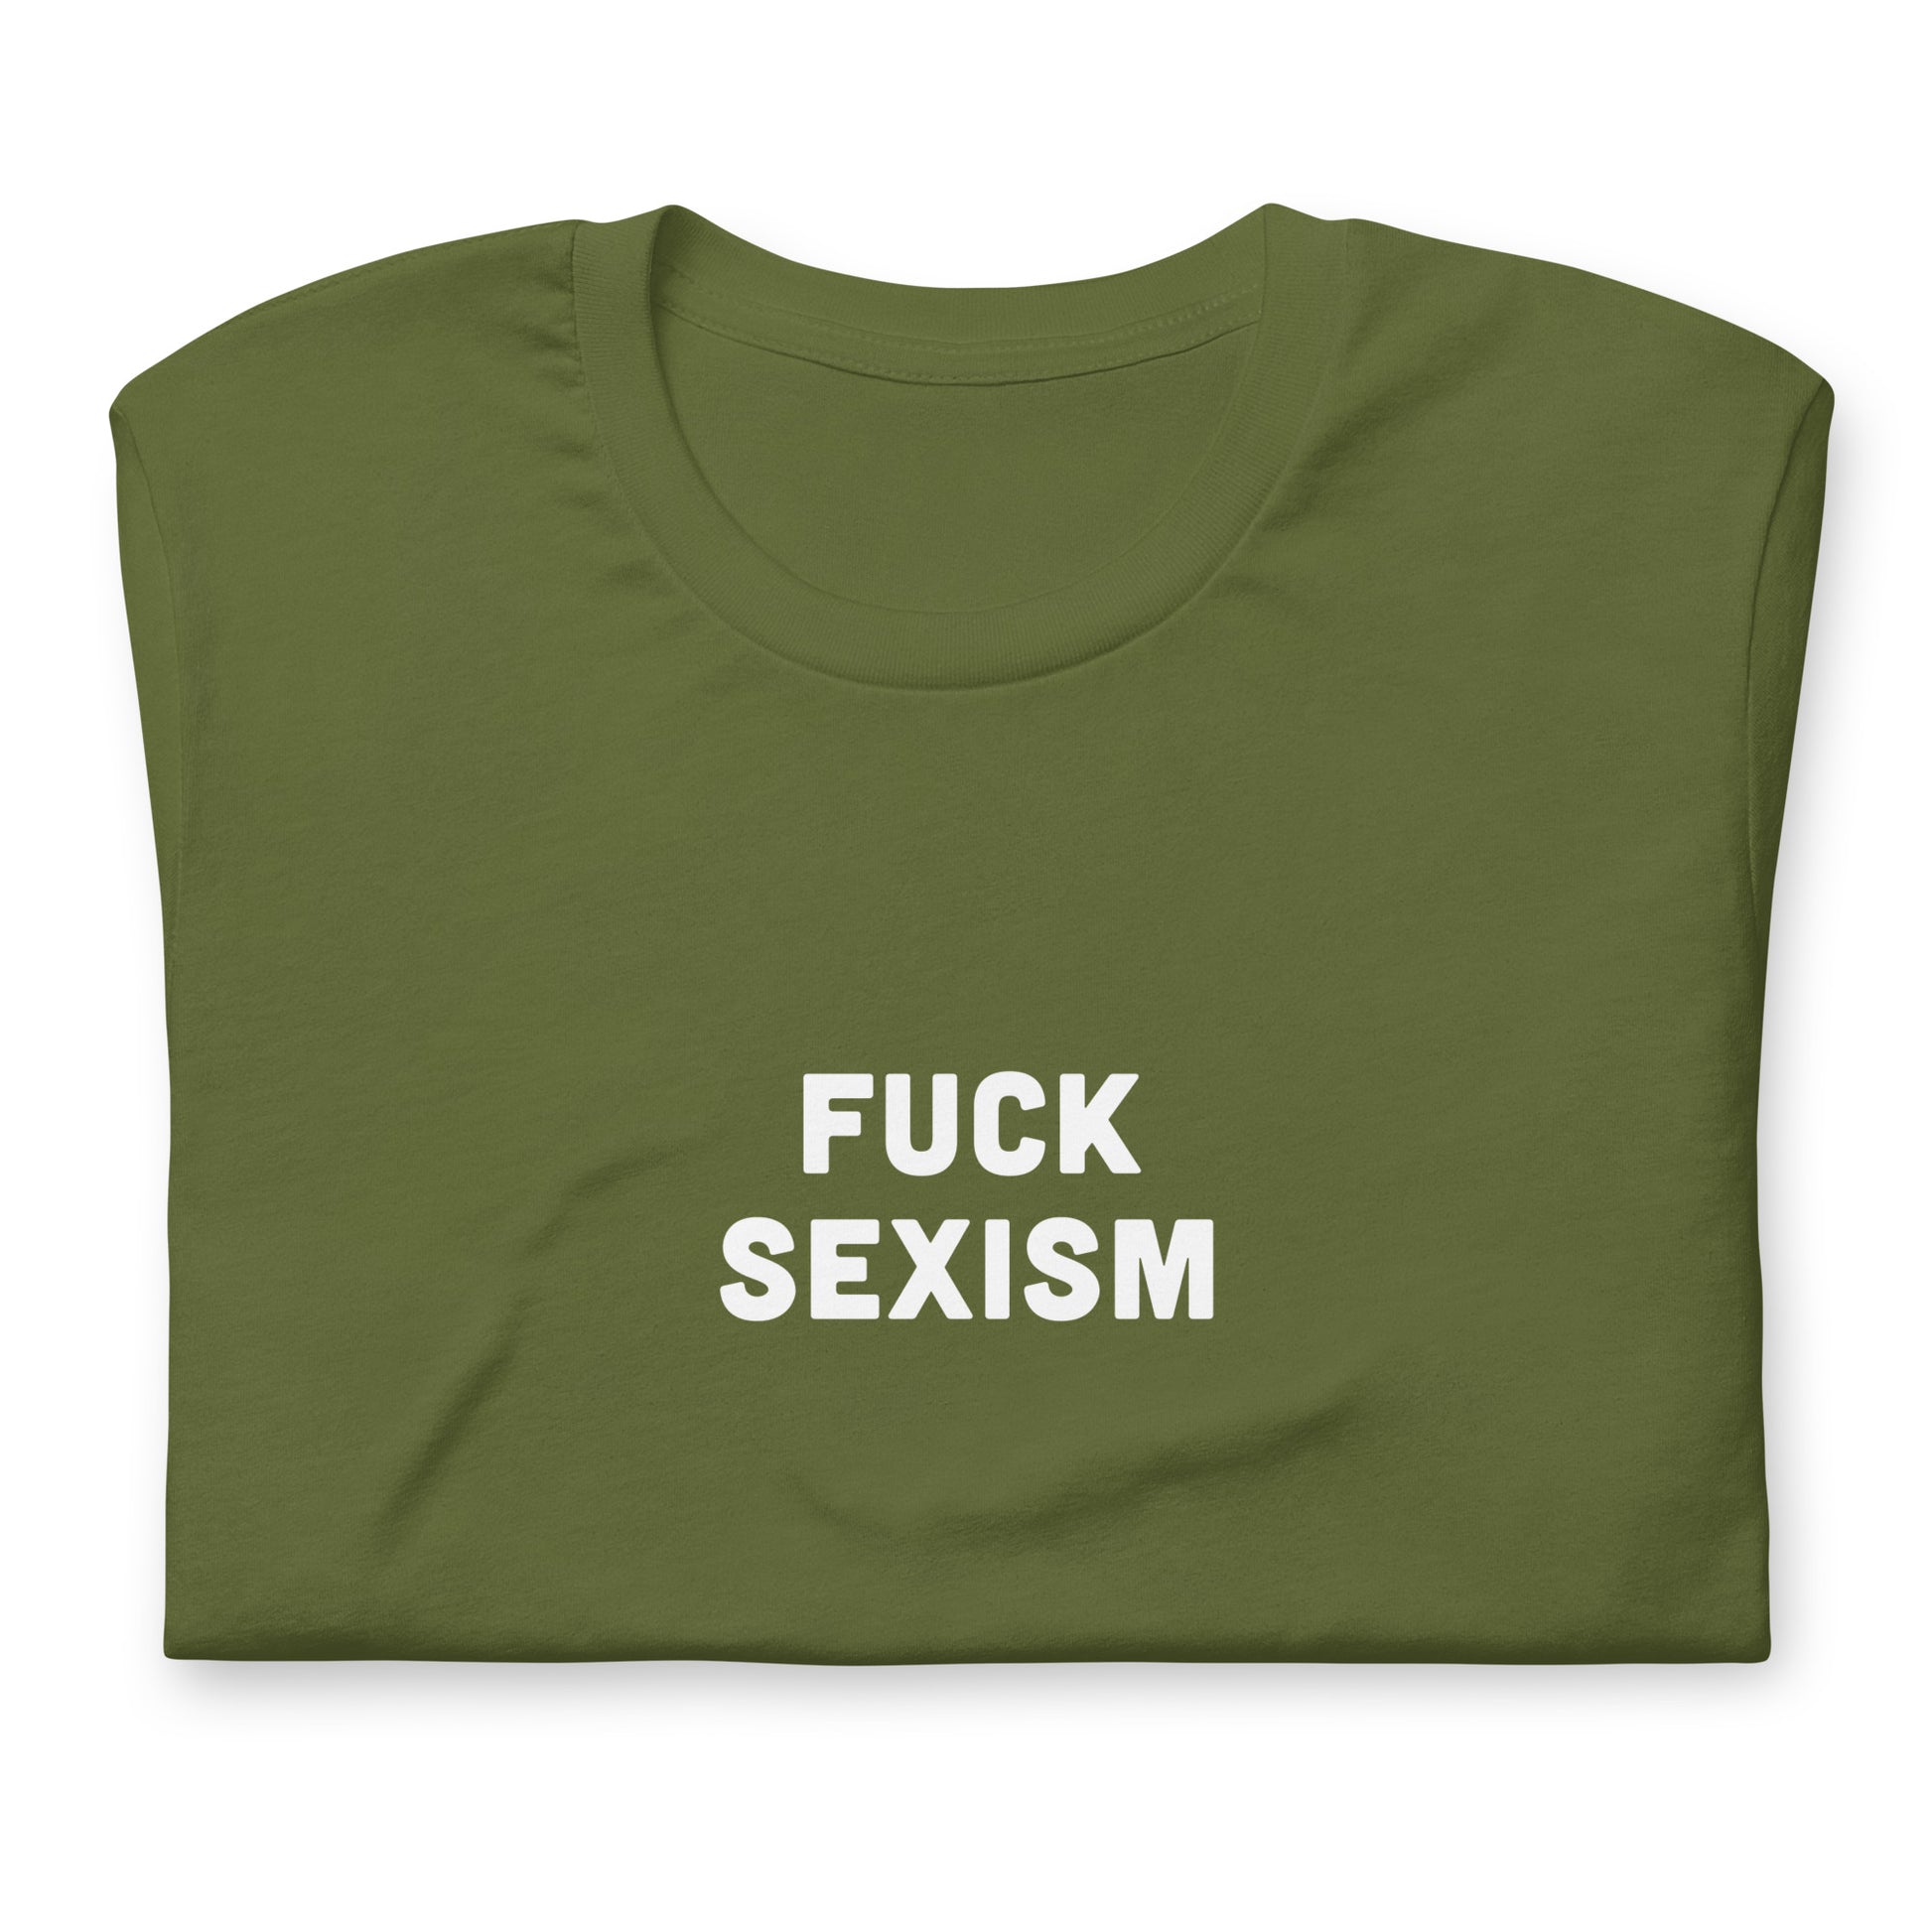 Fuck Sexism T-Shirt Size S Color Navy